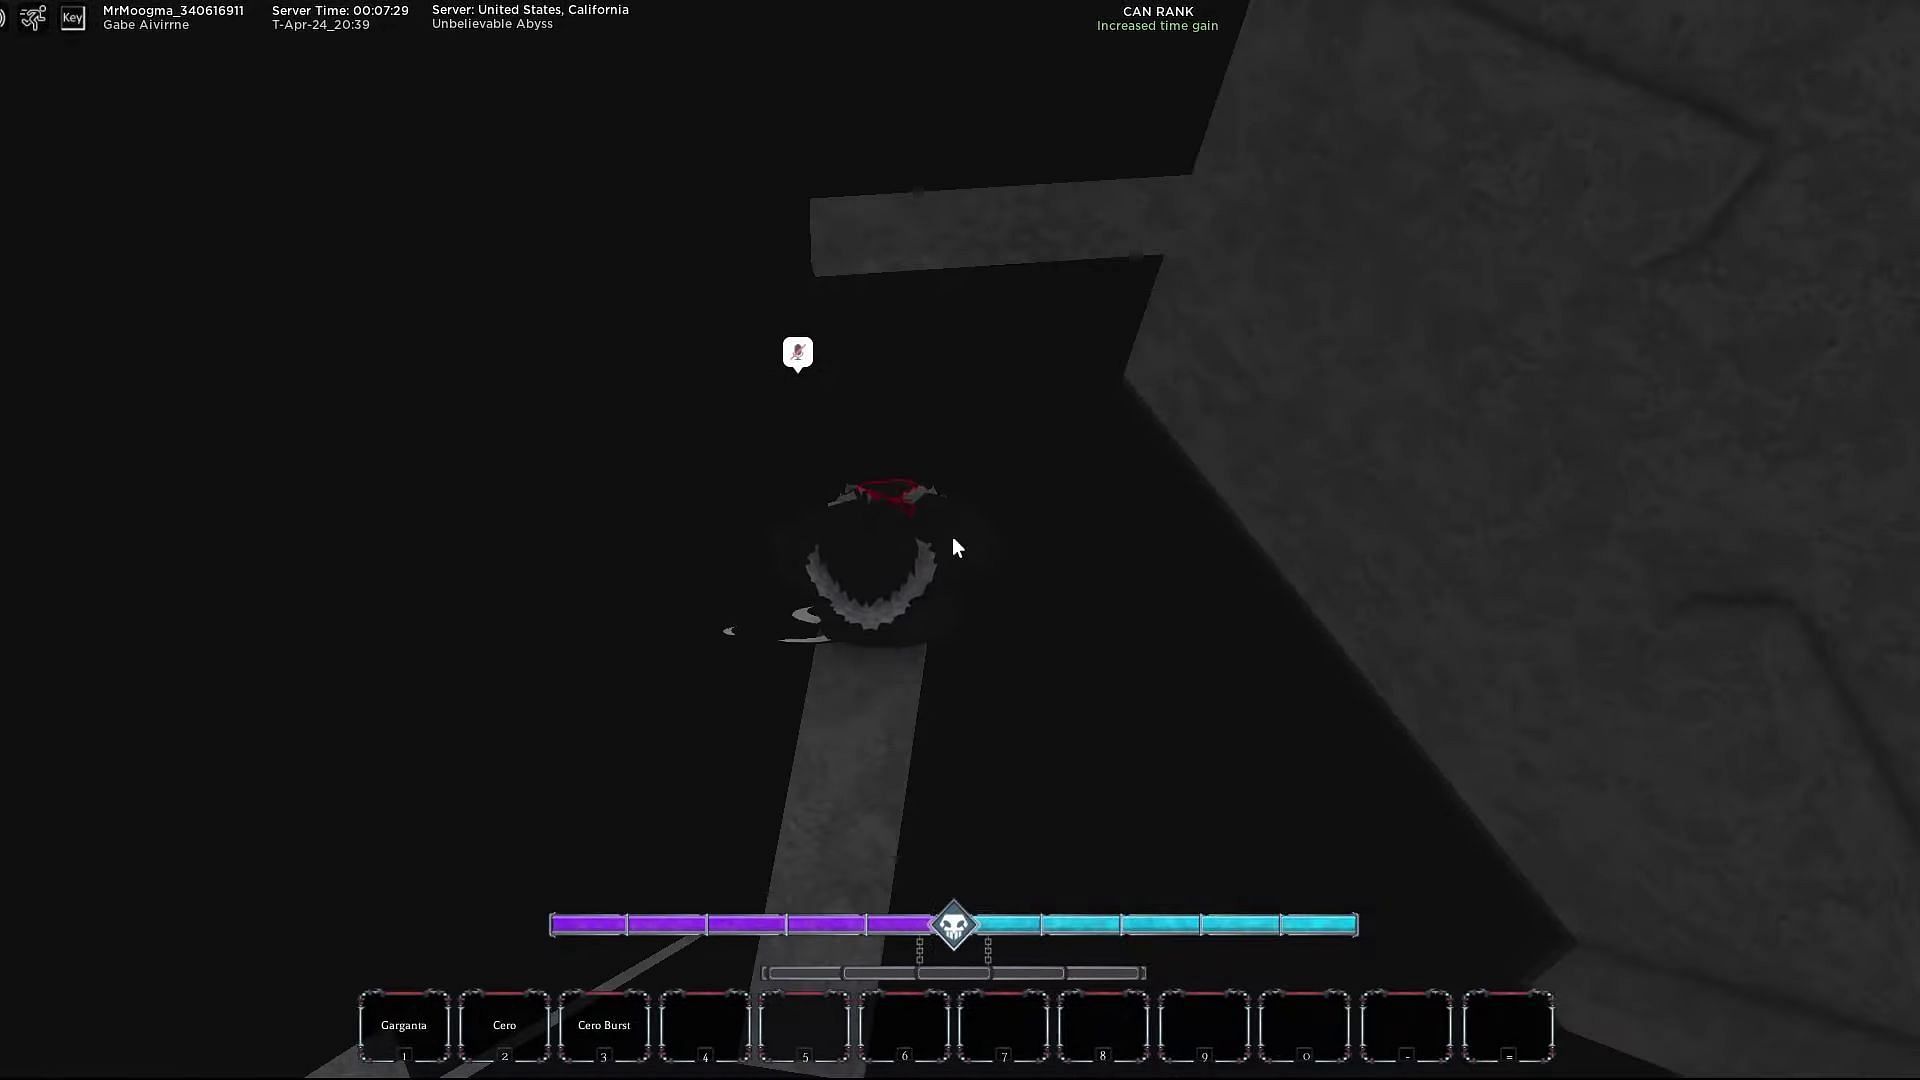 The parkour obby challenge (Image via Roblox || MrMoogma on YouTube)